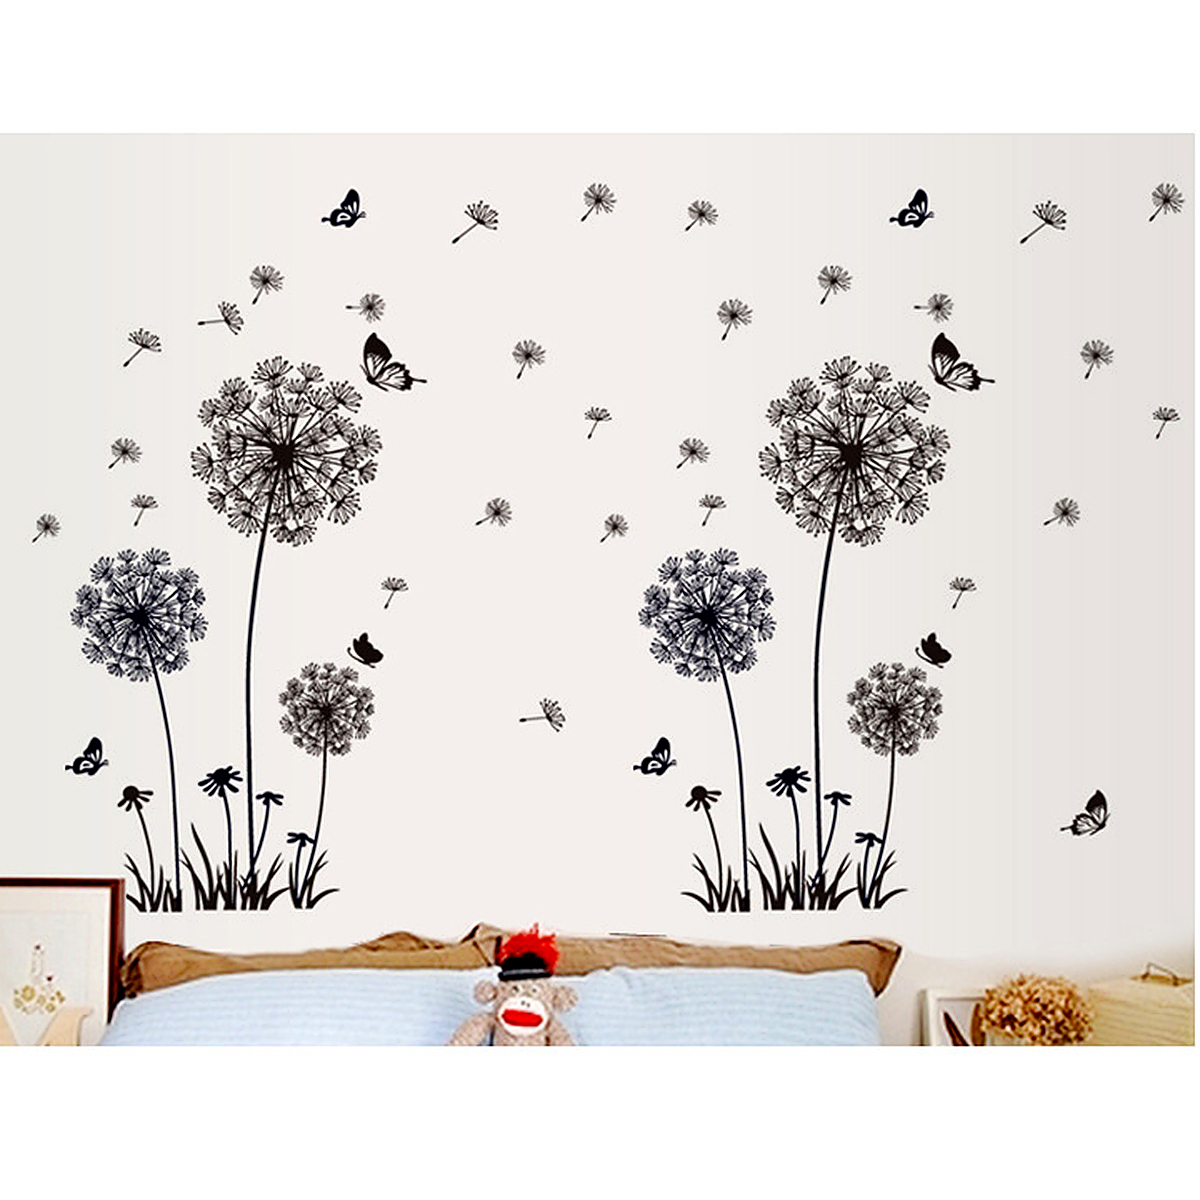 Black Dandelion Wall Sticker Removable Flower Wall Decal Home Decor